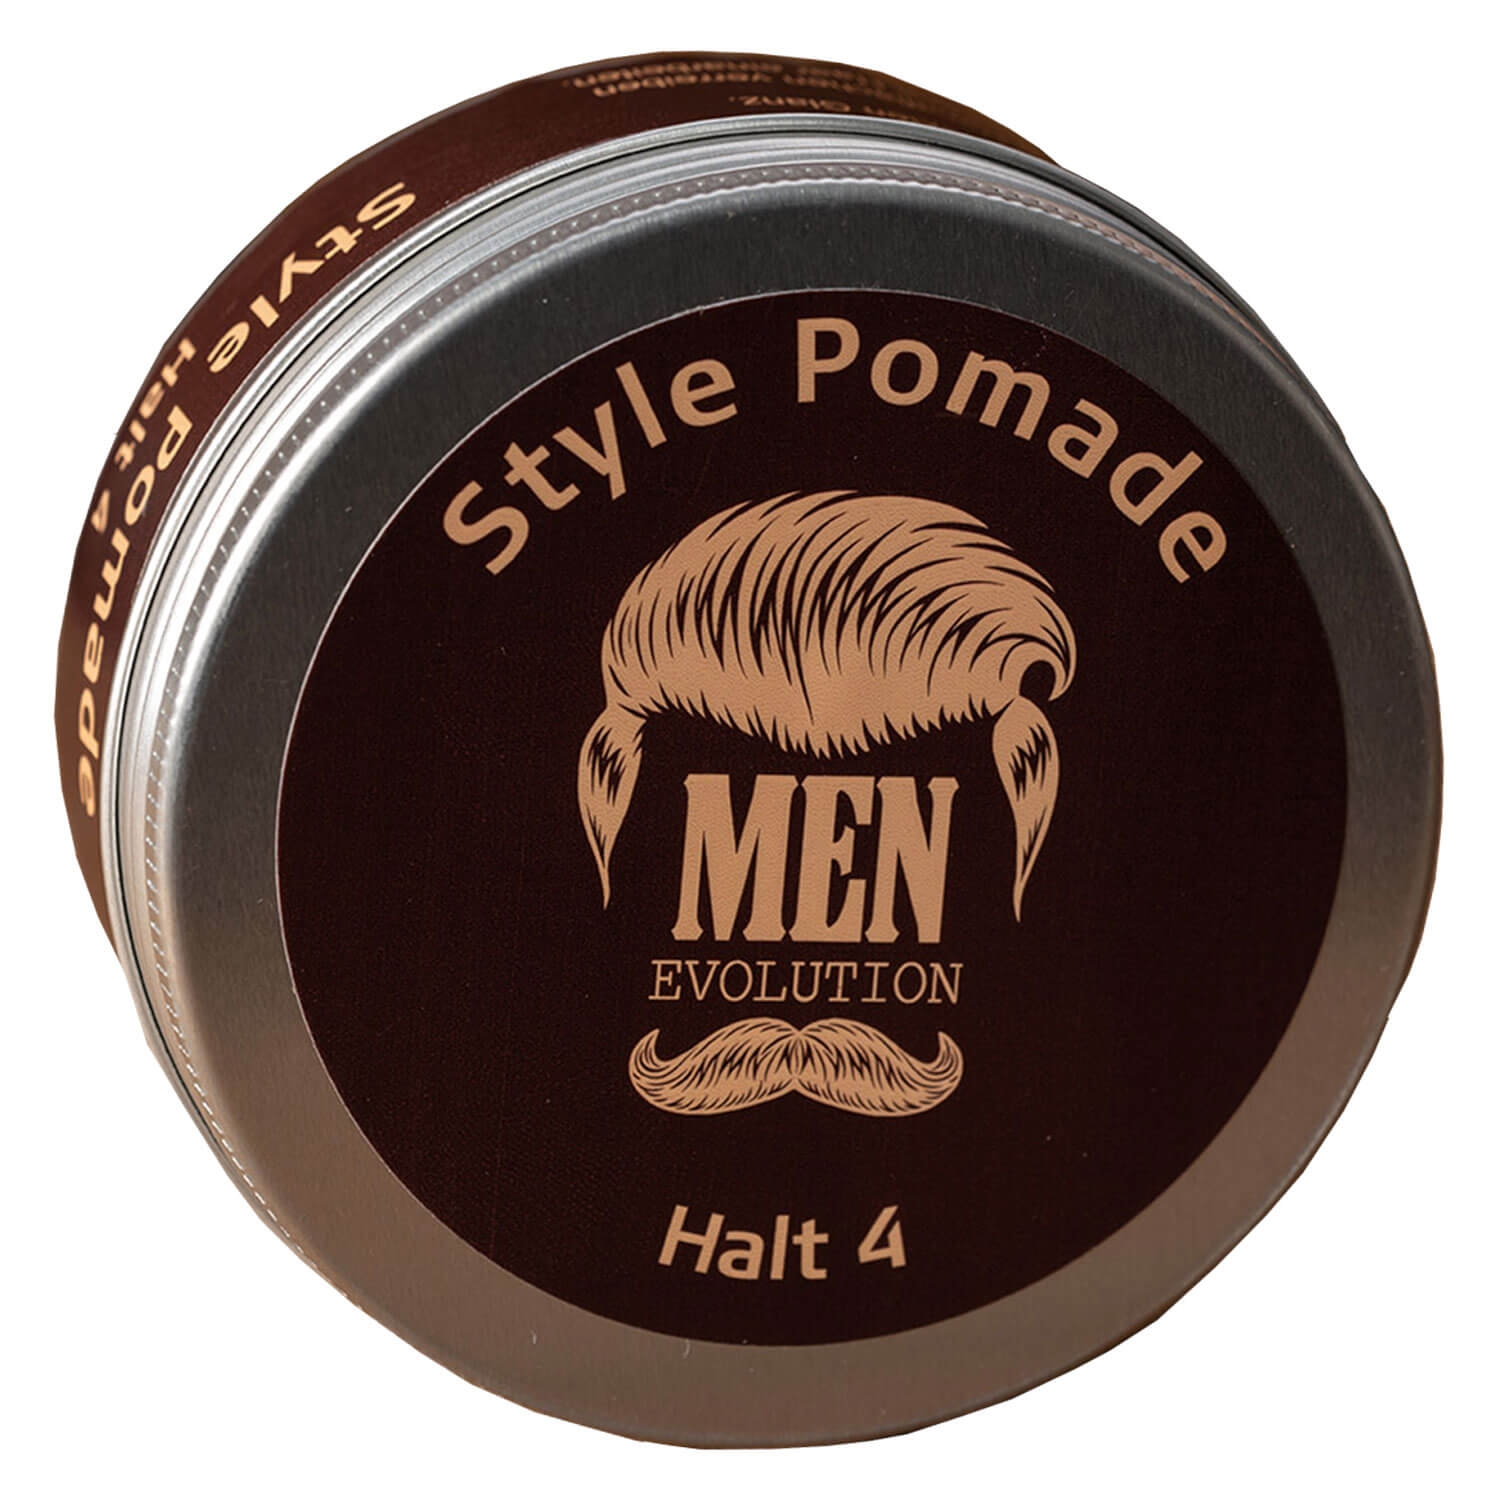 Product image from MEN Evolution - Style Pomade